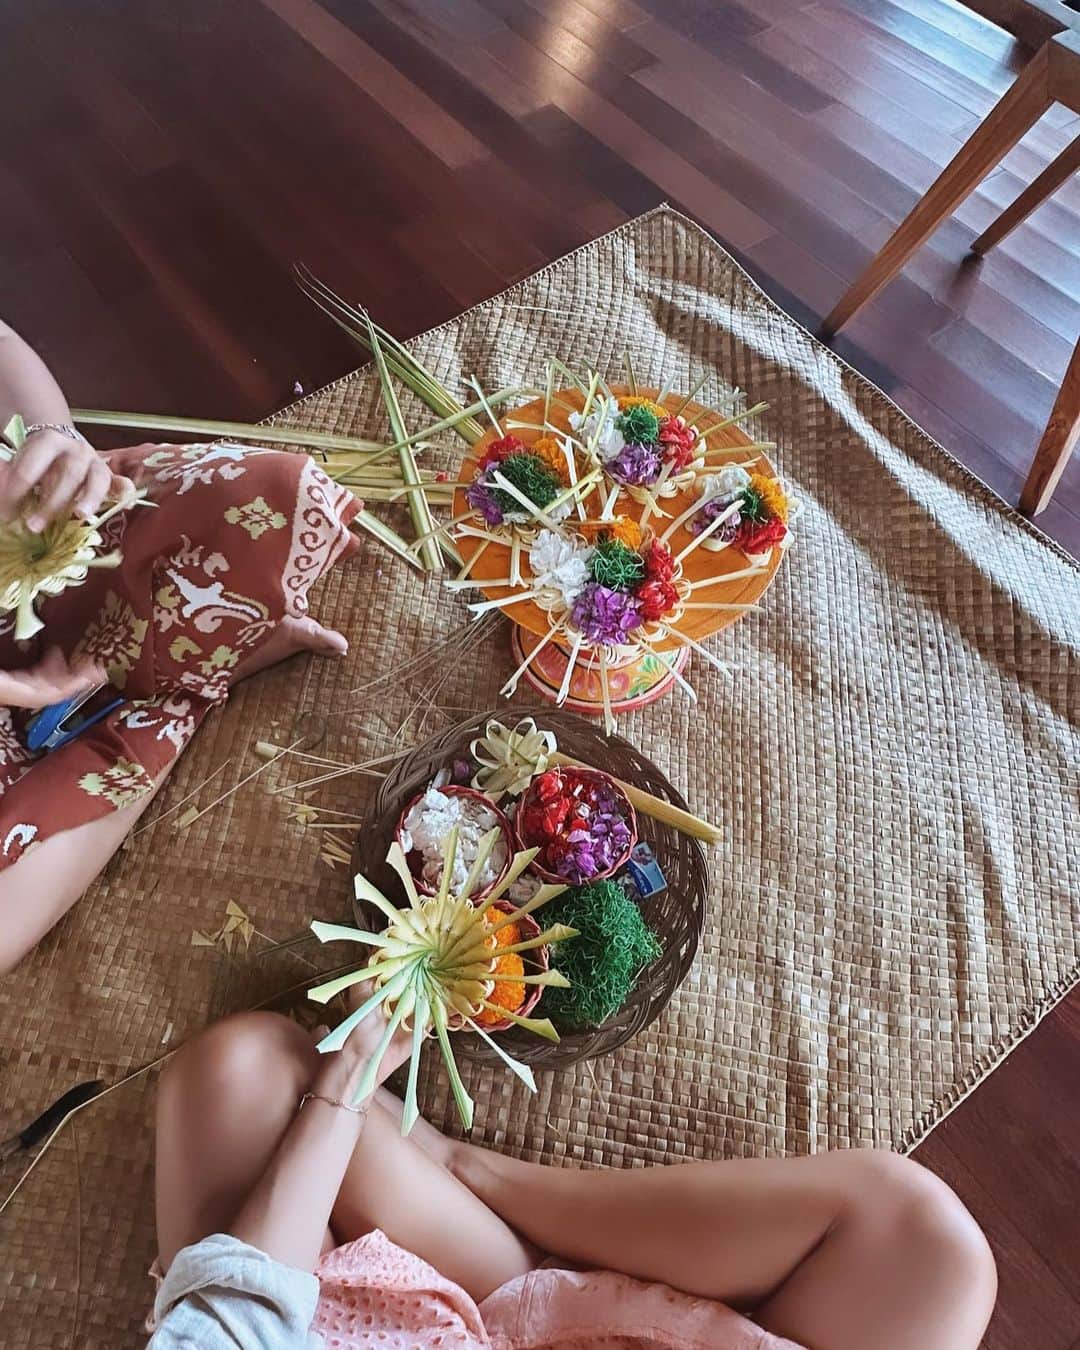 ニオミ・スマートさんのインスタグラム写真 - (ニオミ・スマートInstagram)「Terima kasih Lolita for teaching me how to make the beautiful traditional canang sari - these are the offerings that we see everywhere in Bali. They’re handmade woven baskets made from palm leaves and decorated with colourful petals and incense to pass on as an offering to the land and the gods.   What a creative way of praying & spreading love, expressing gratitude, and creating beauty on a daily basis. Within one household approximately 50 canang sari are offered in one day! I can’t think of an equivalent daily practice of offering back to the land that we do back home.   I’ve taken inspiration from this symbol of gratitude, and everywhere I’ve been during the past year I’ve created a small altar in the home with items of personal significance to me. This keeps me grounded in new environments. I’ve started offering natural items I find such as flowers or shells to the altar, creating more purpose and a connection to nature 🙏🌟🌿.   For me, this is a moment during my day to pause and consider what I’m thankful for in my life, for the guidance, the protection, and the support I feel around me. It is unrealistic to make and offer 50 canang sari a day especially when back home in the West, but taking inspiration from this and finding a personal unique daily ritual to take a moment to express gratitude I think is a beautiful thing.  If you’re considering building your own gratitude altar at home, I recommend gathering some of your most precious personal items such as sentimental ornaments, crystals, jewellery, and decorating a small table. Make it fun and get creative! I found this handwoven throw in Sumba (see last image) that I’ve used to cover the table, and decorated with petals and shells found in Bali. I’ve placed my incense, sage, and palo santo here for cleansing, and added my favourite oracle cards and crystals. I also occasionally add photos and other items that are special to me - it’s constantly evolving and growing!  If you feel called to create your own, have fun with it and know there is no right or wrong. It’s your own unique creation and practice.   🙏🌟」11月20日 16時06分 - niomismart